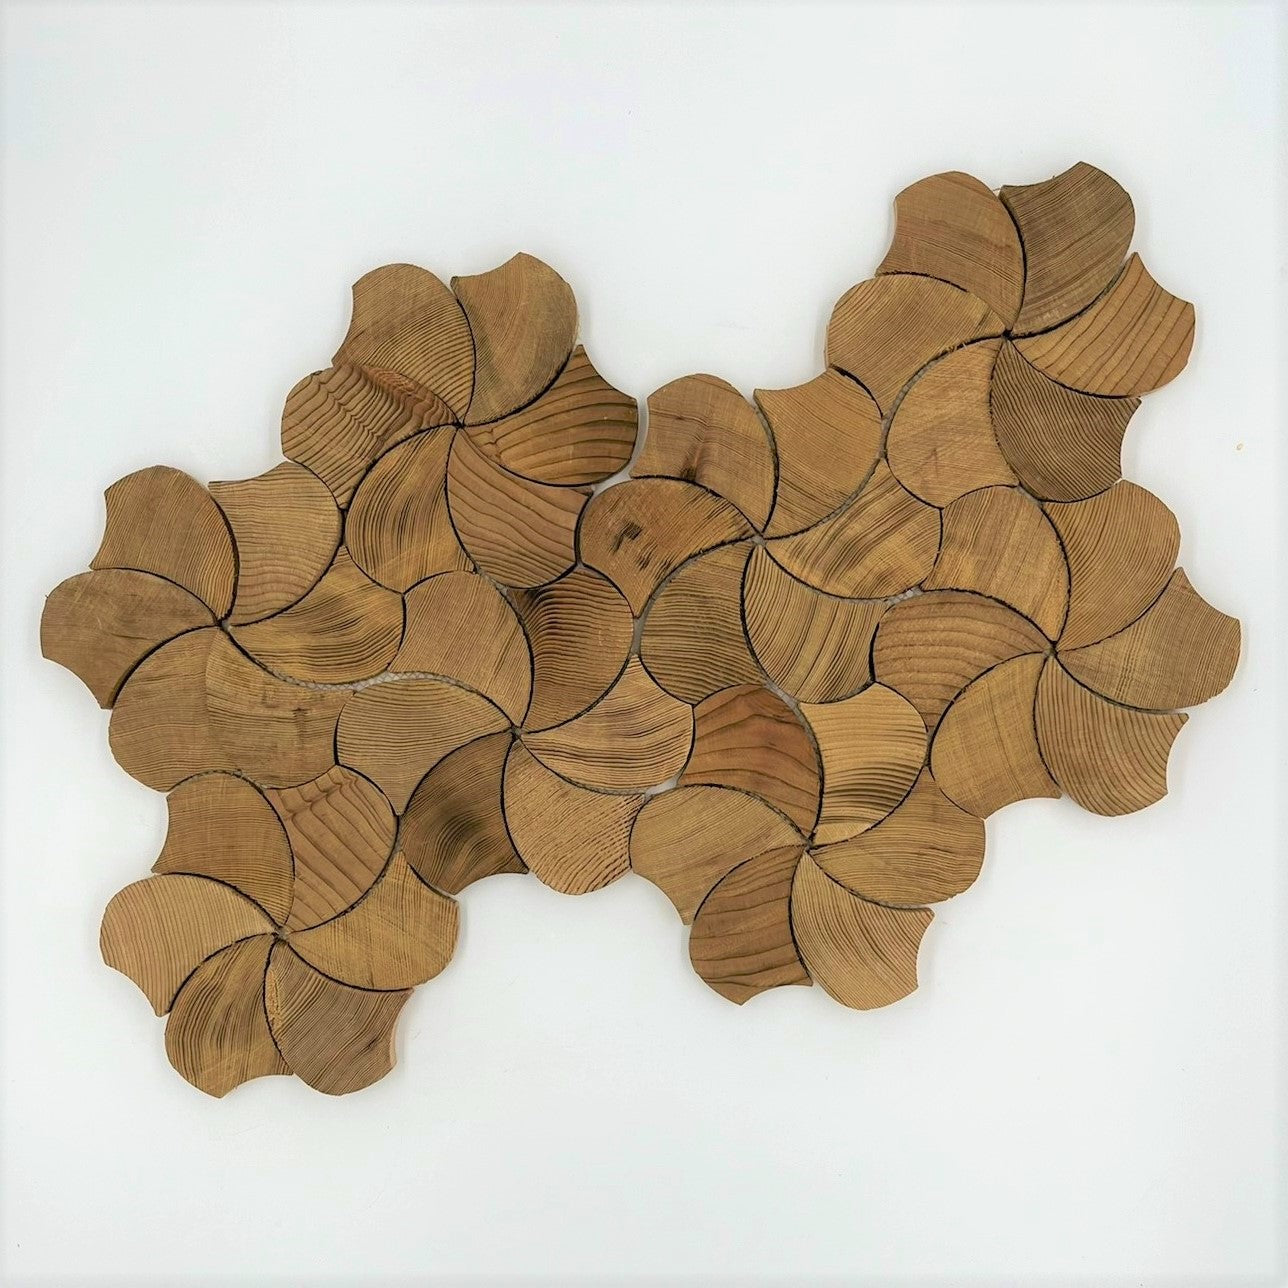 forest elements stereo pinwheel 2 wood wall 3D mosaic natural pine accoustical decorative luxury interior distributed by surface group